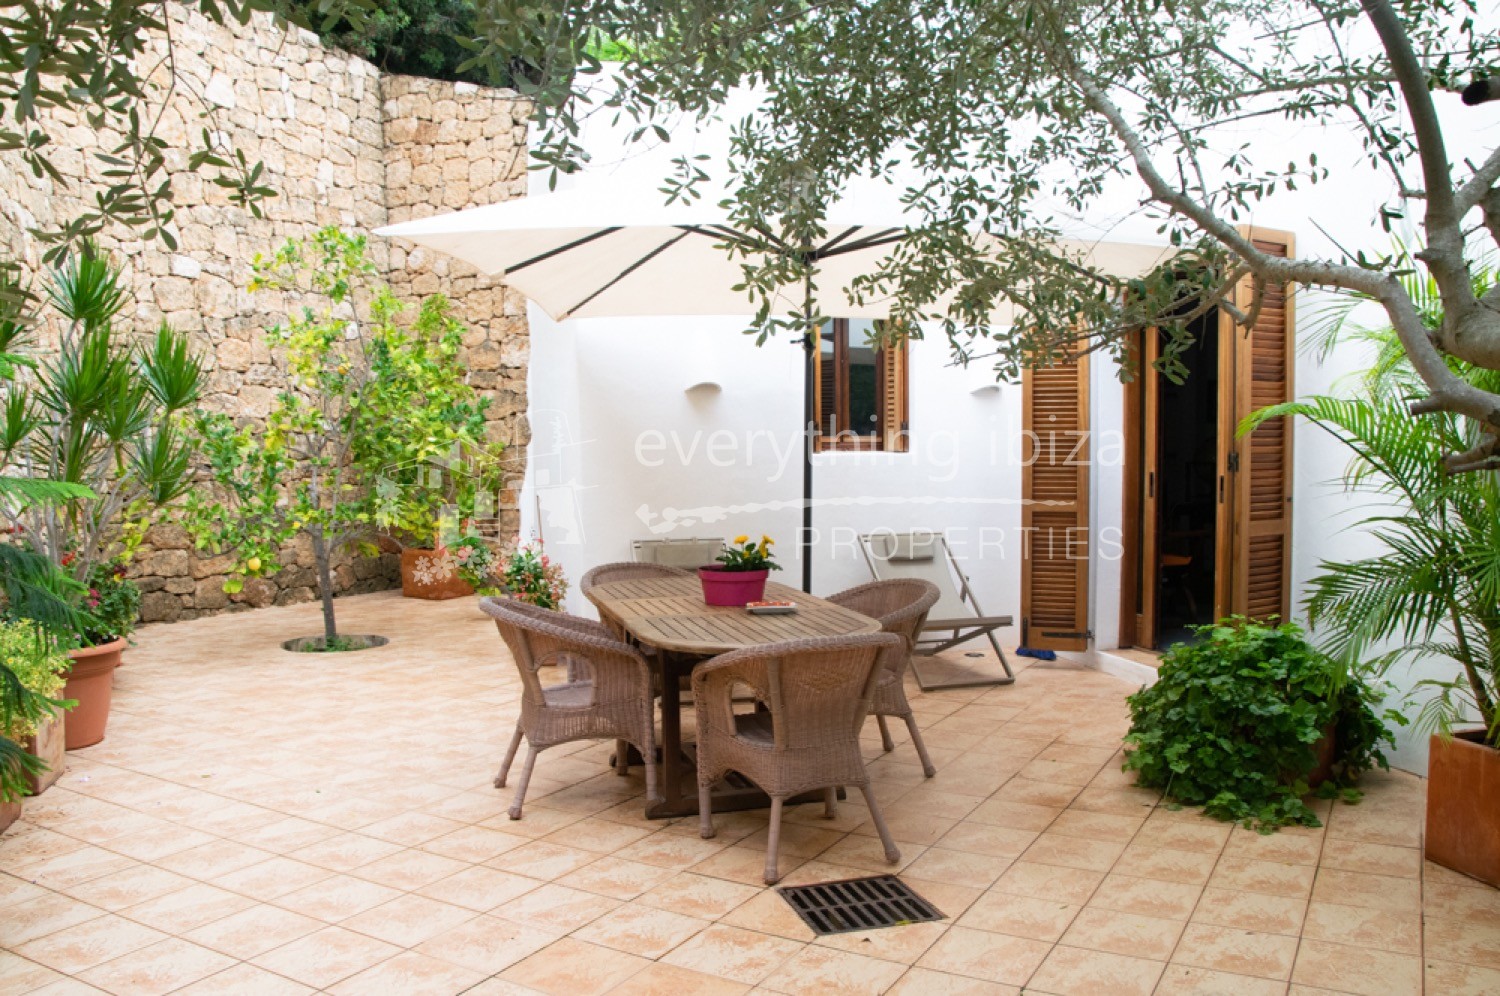 ref 1190 - Country villa for sale in Ibiza by everything ibiza Properties